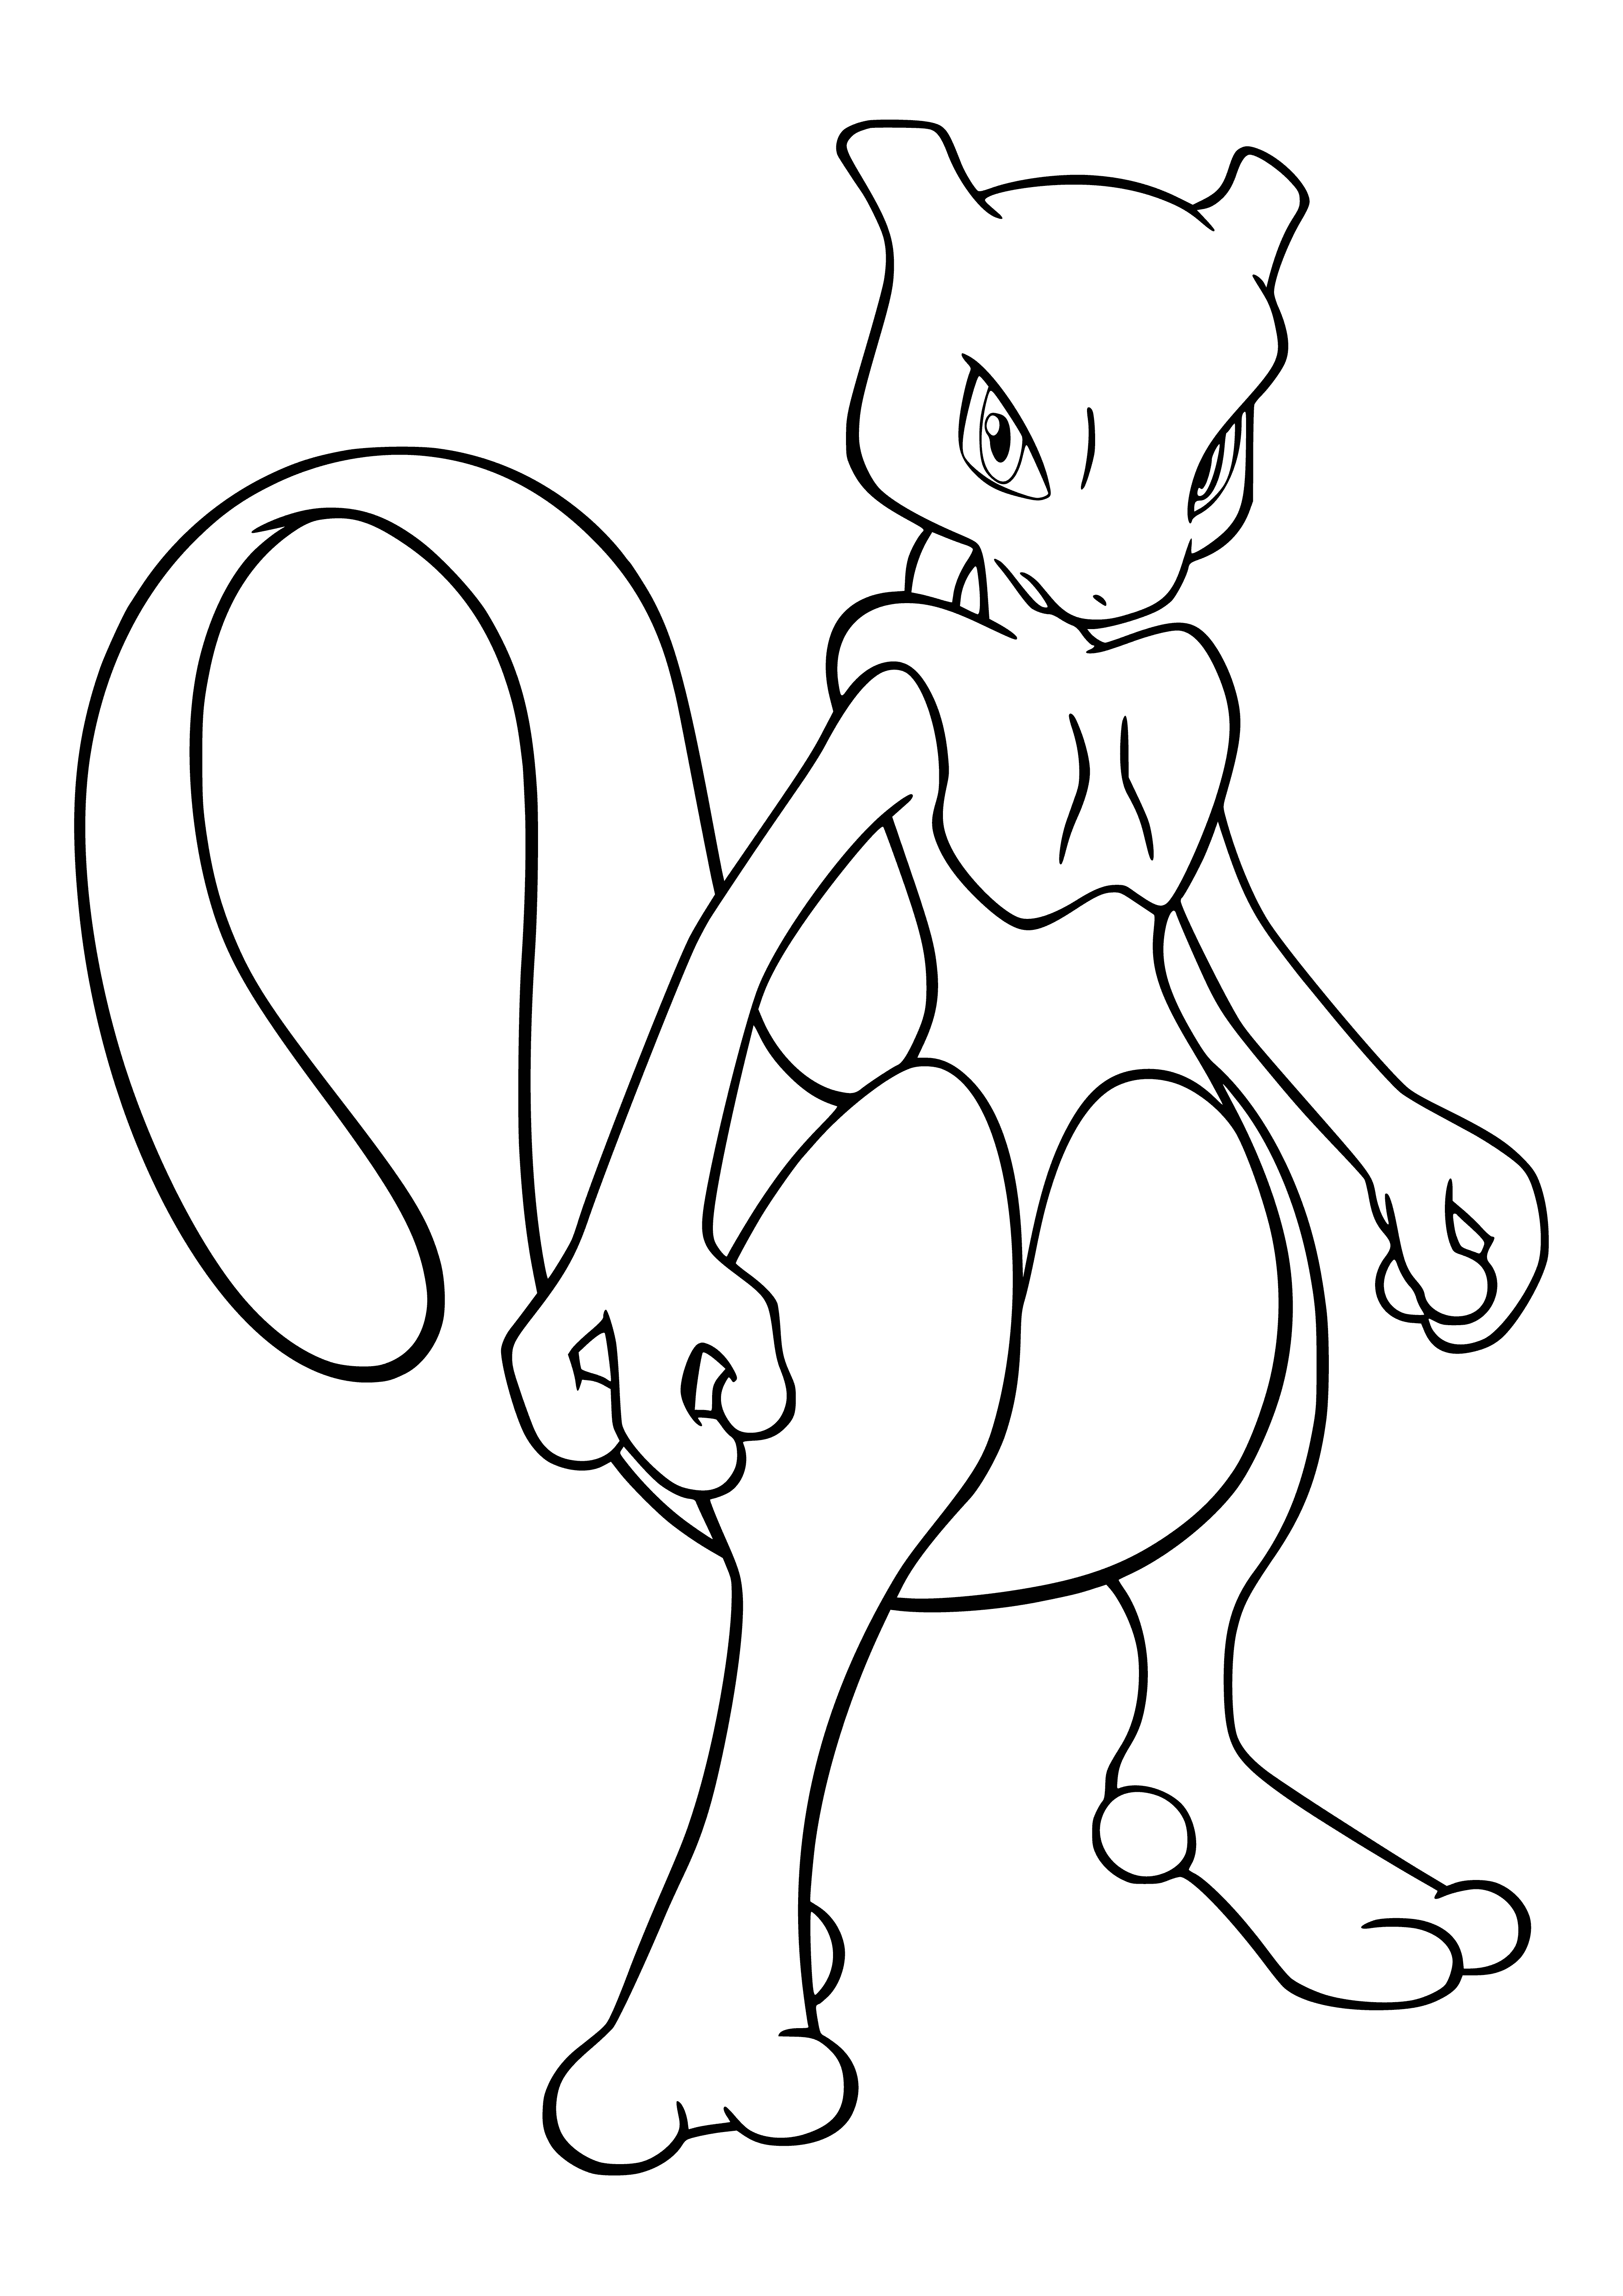 Legendary Pokemon Mewtwo coloring page